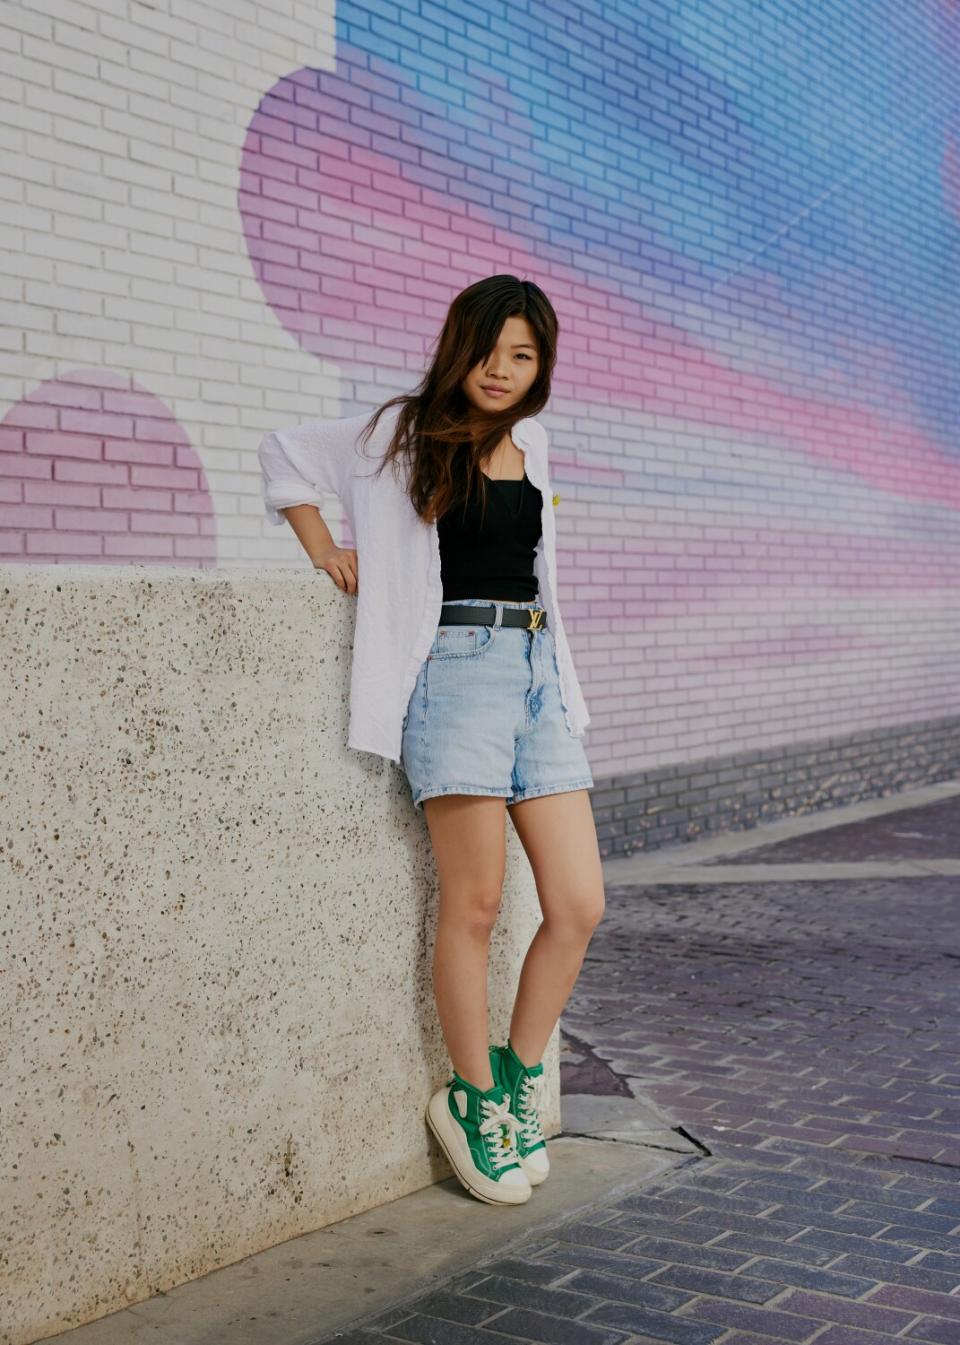 Miya Cech poses up against a wall in Little Tokyo.